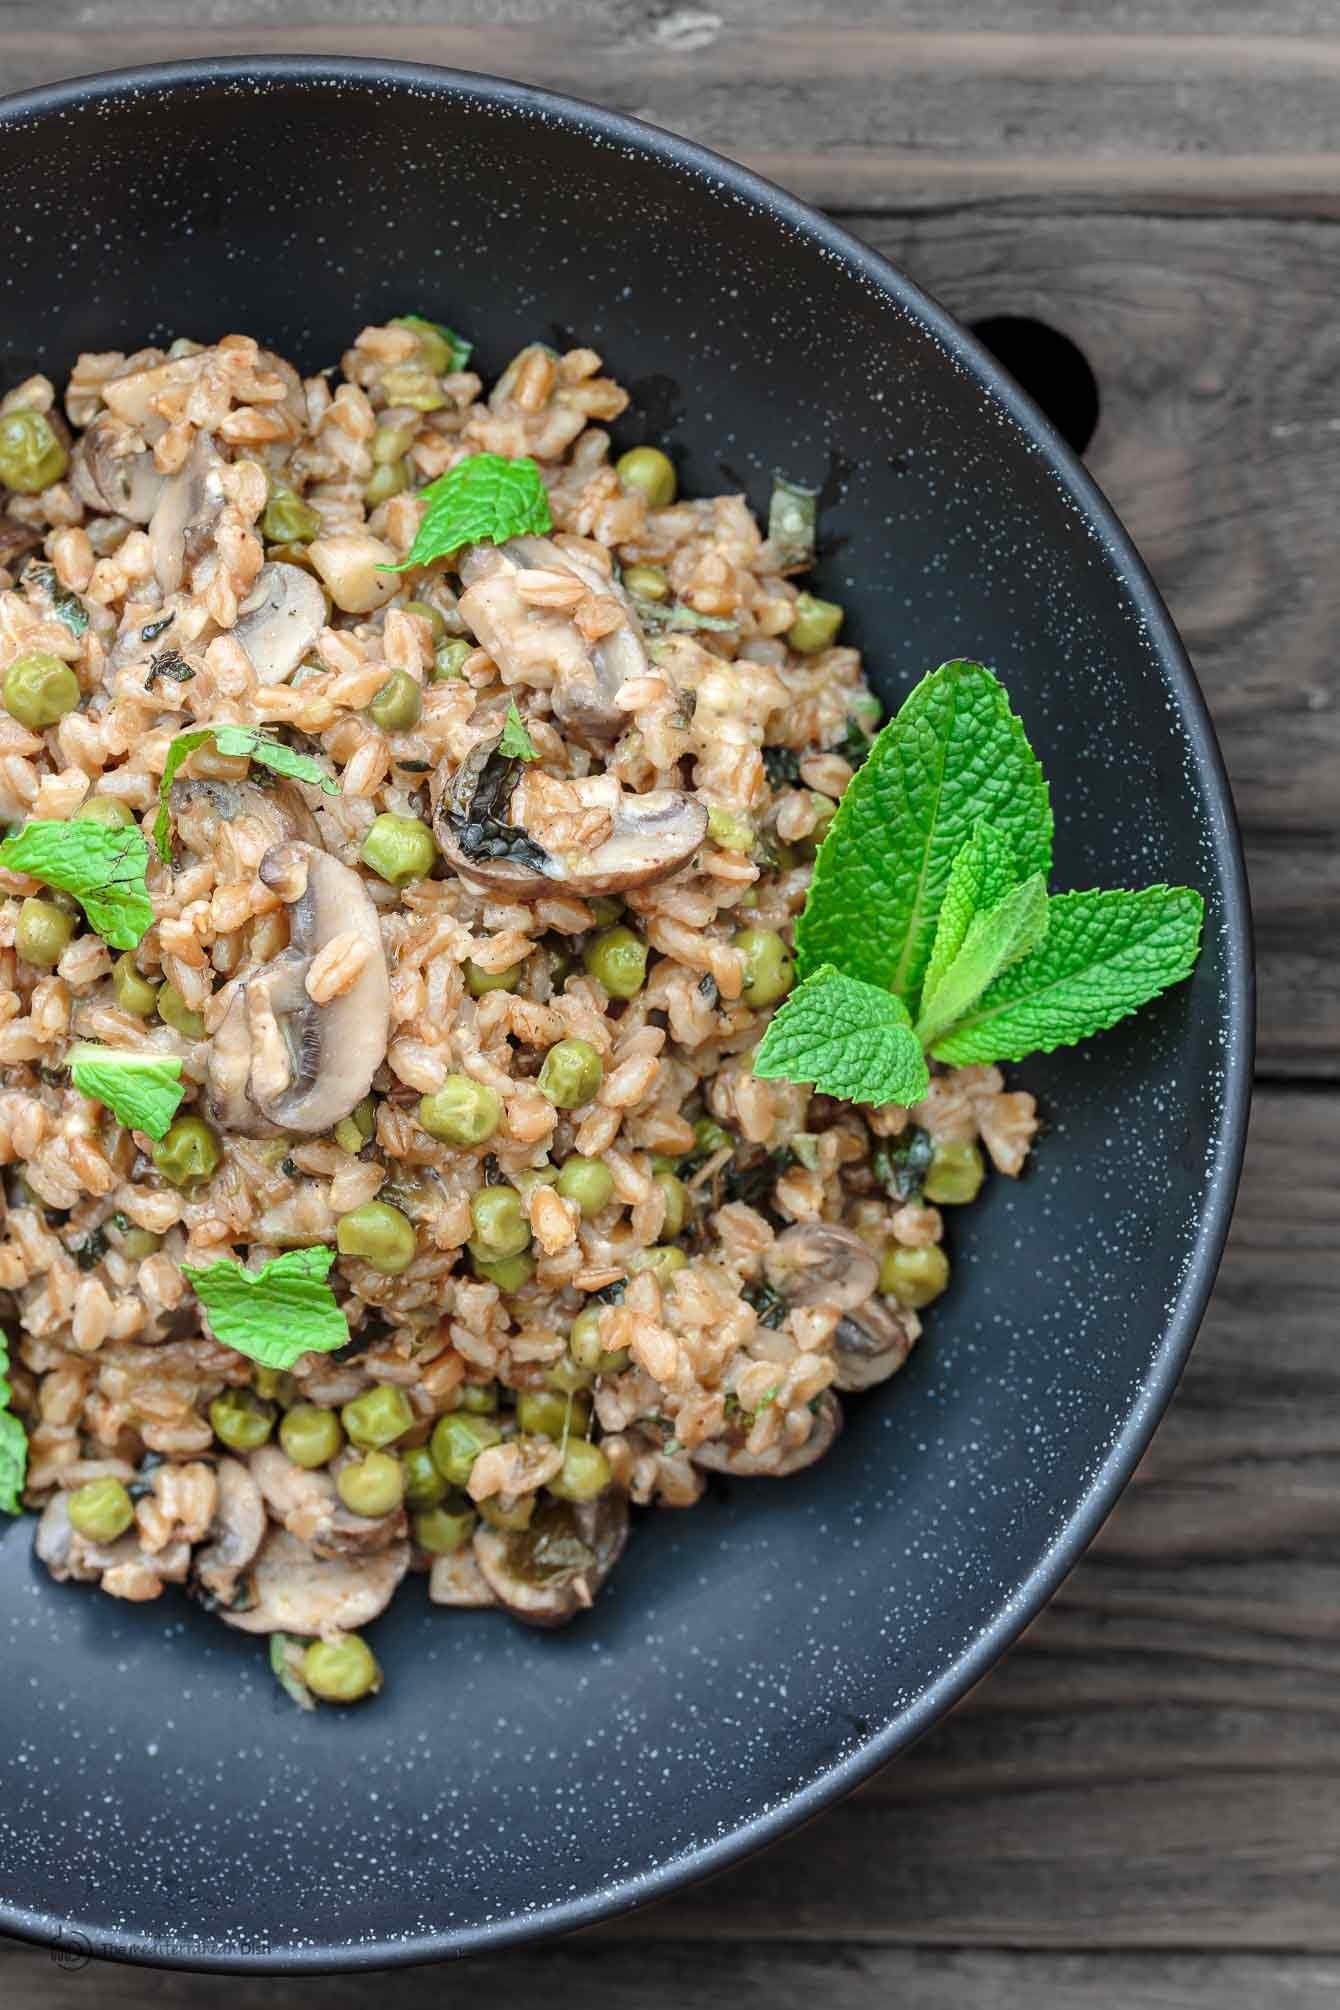 Farro risotto with mushrooms and peas